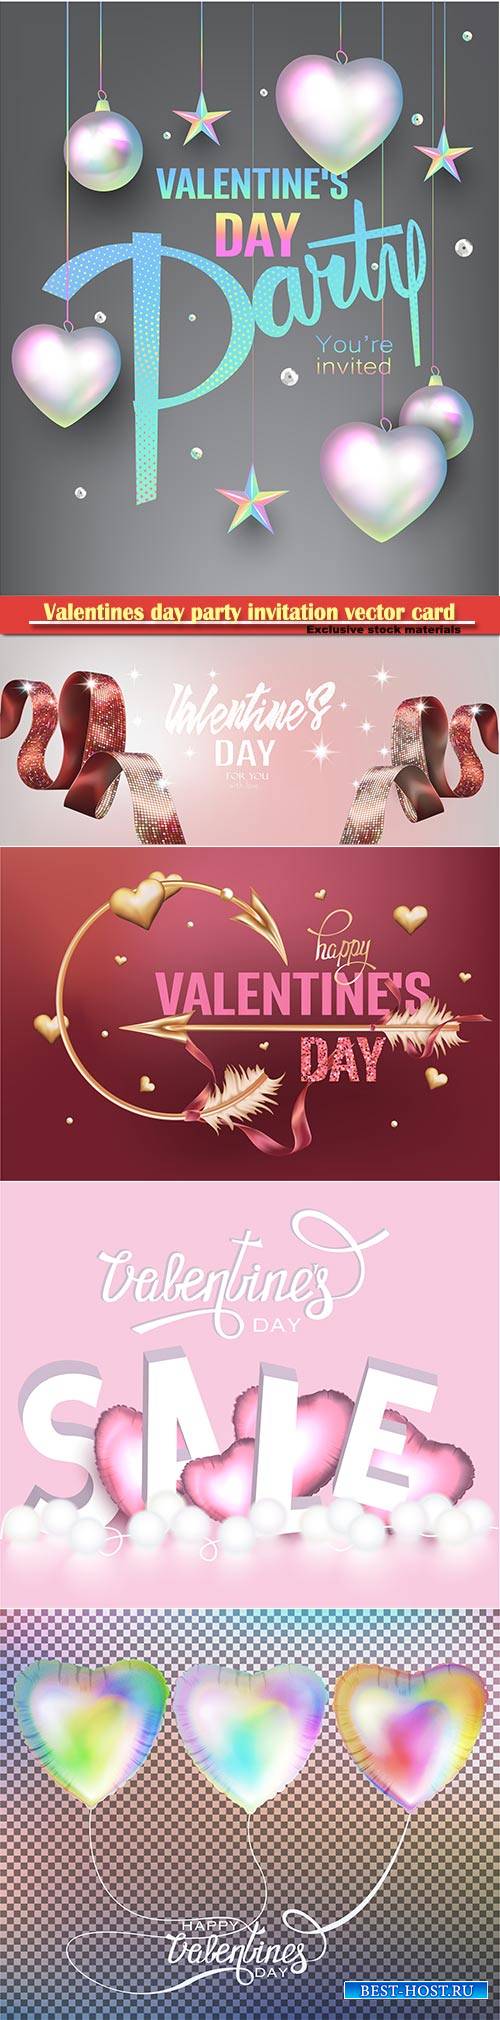 Valentines day party invitation vector card # 8